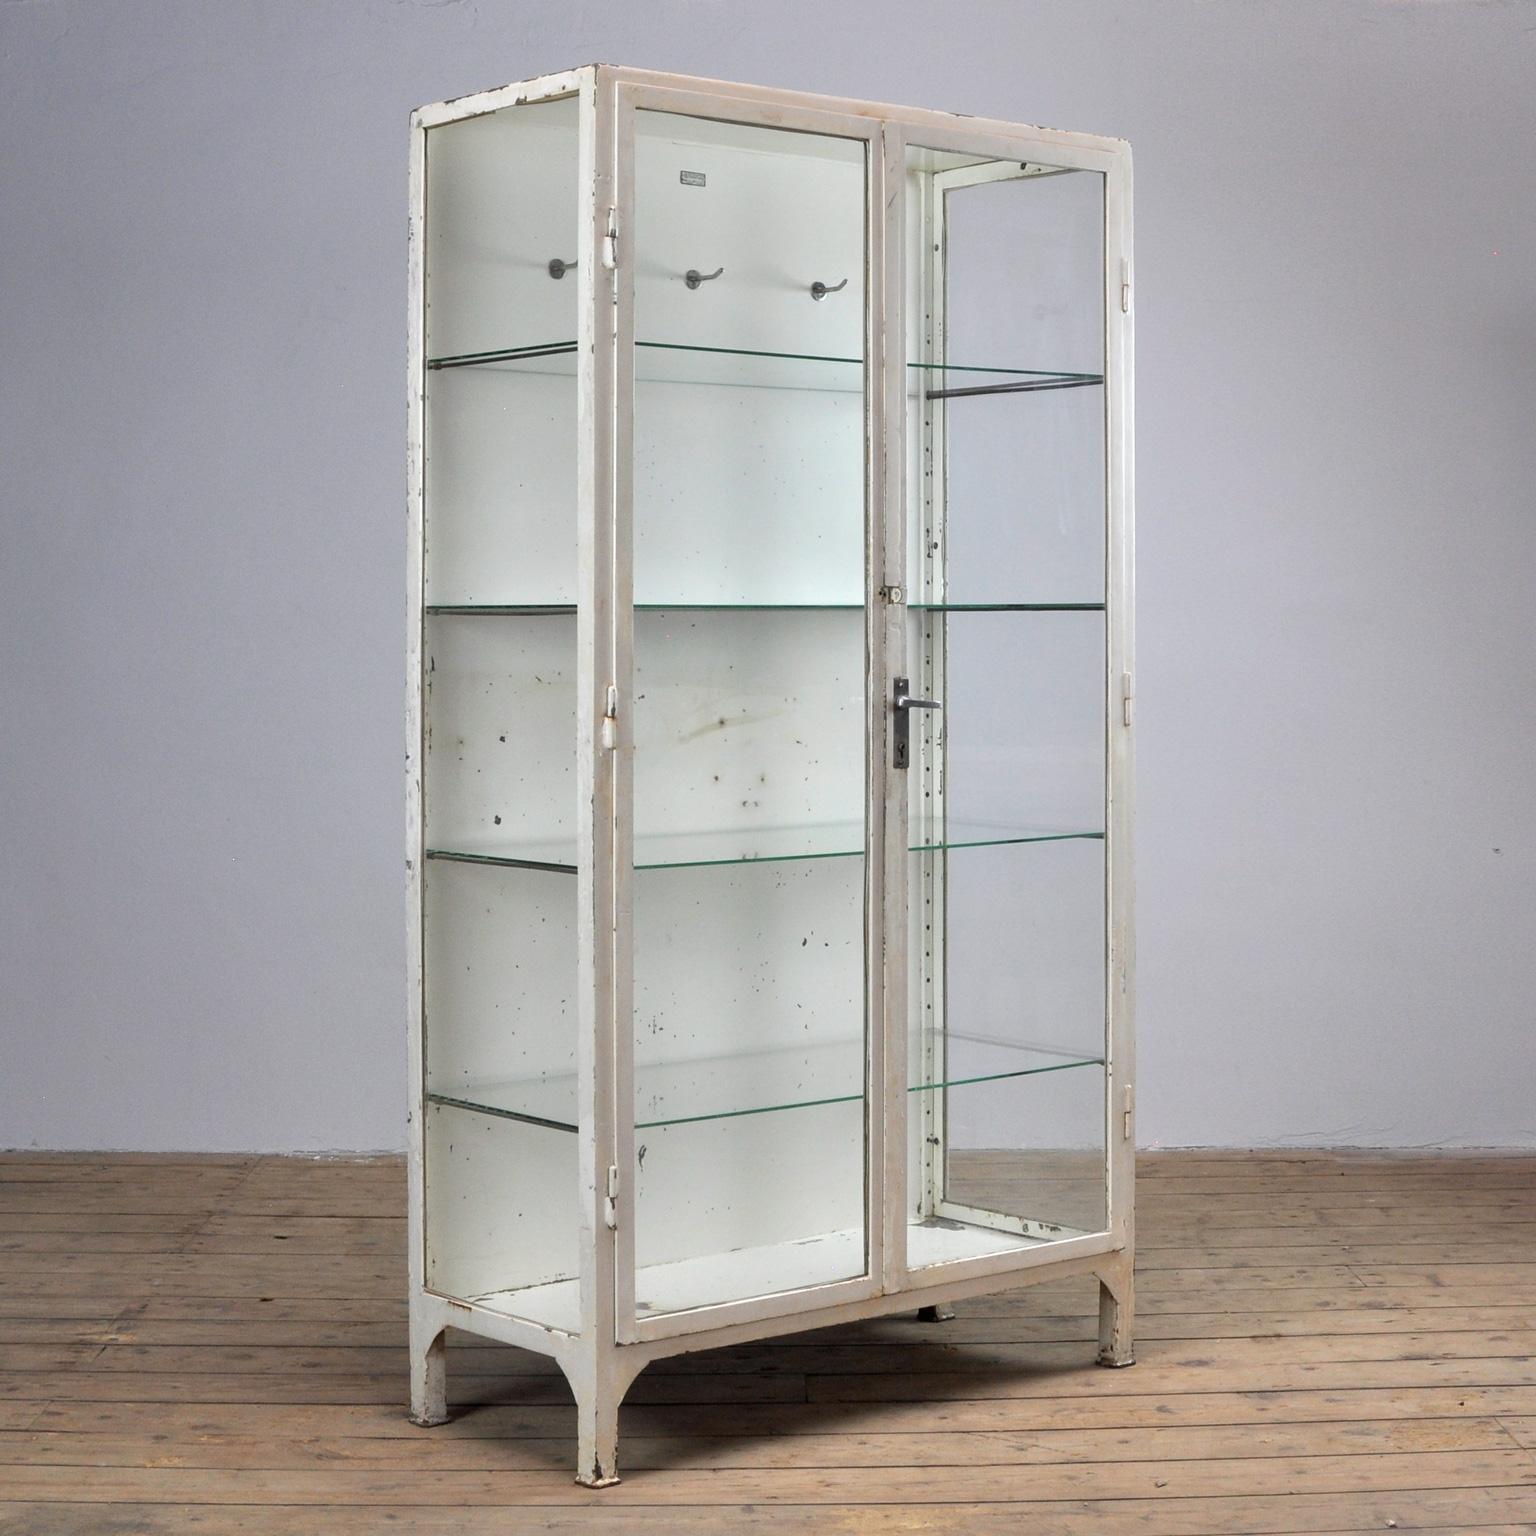 This medical cabinet was produced in 1966 in Poland. The cabinet is made from thick iron and glass. It features four new glass shelves and three clothing hooks.